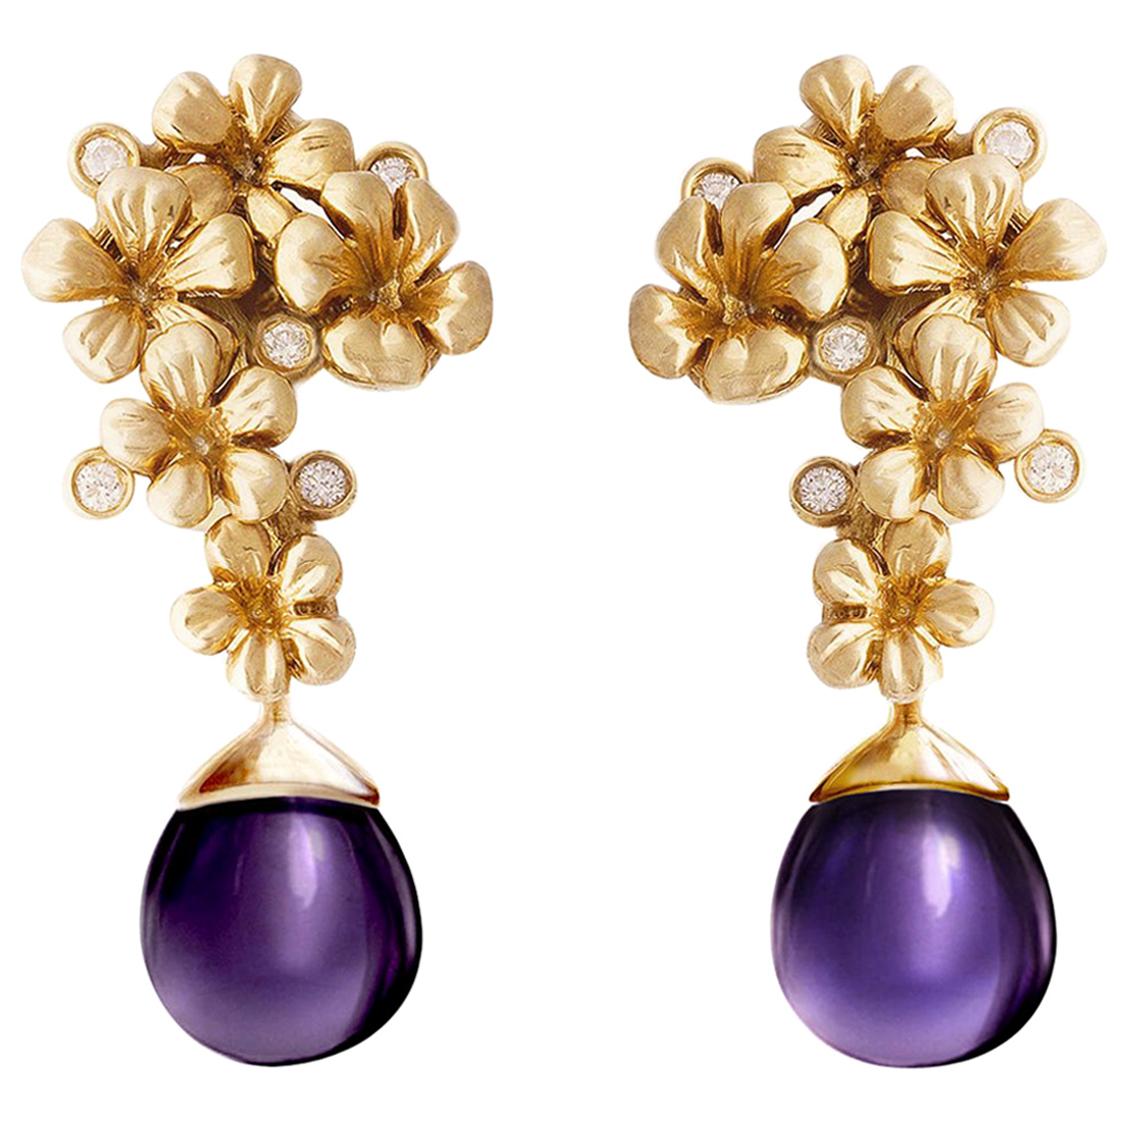 Plum Blossom Earrings by the Artist in Yellow Gold with Round Diamonds For Sale